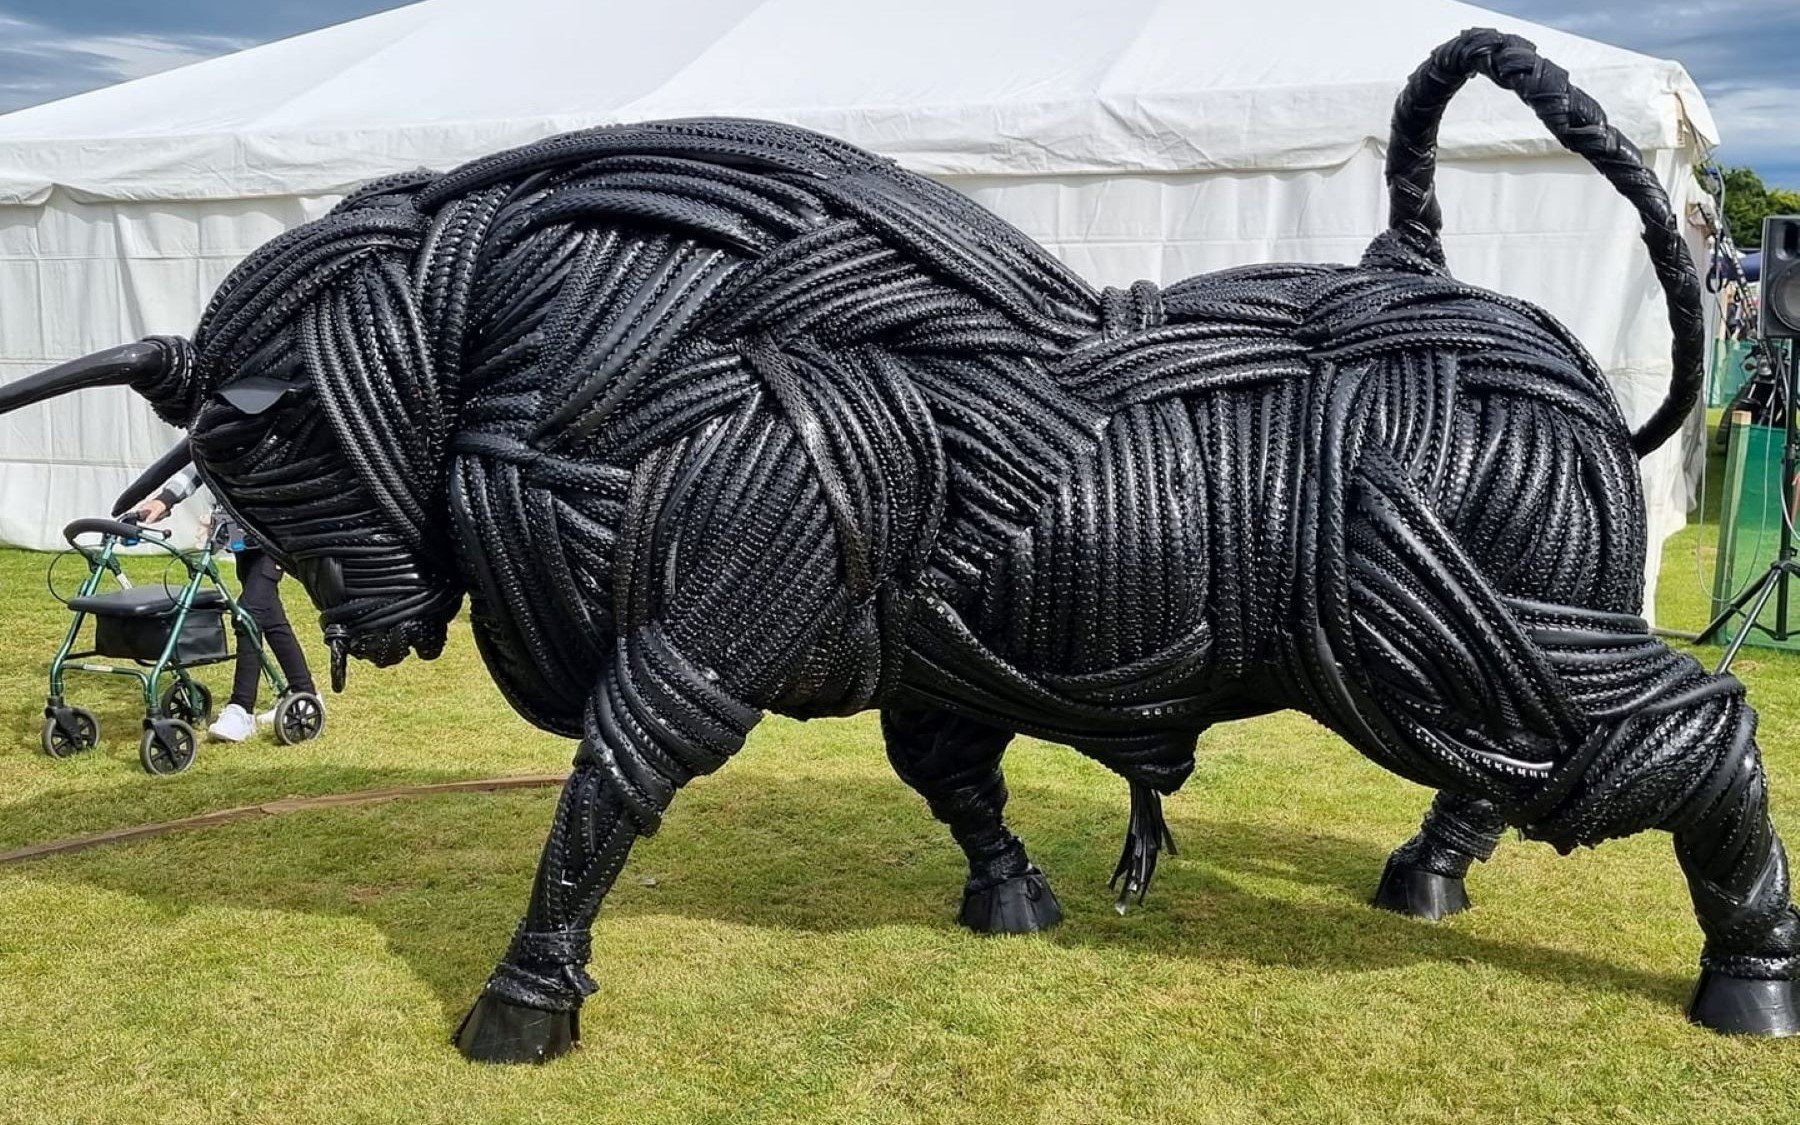 Terrabull.  Created by Regan Cooper from recycled bicycle tires.jpg